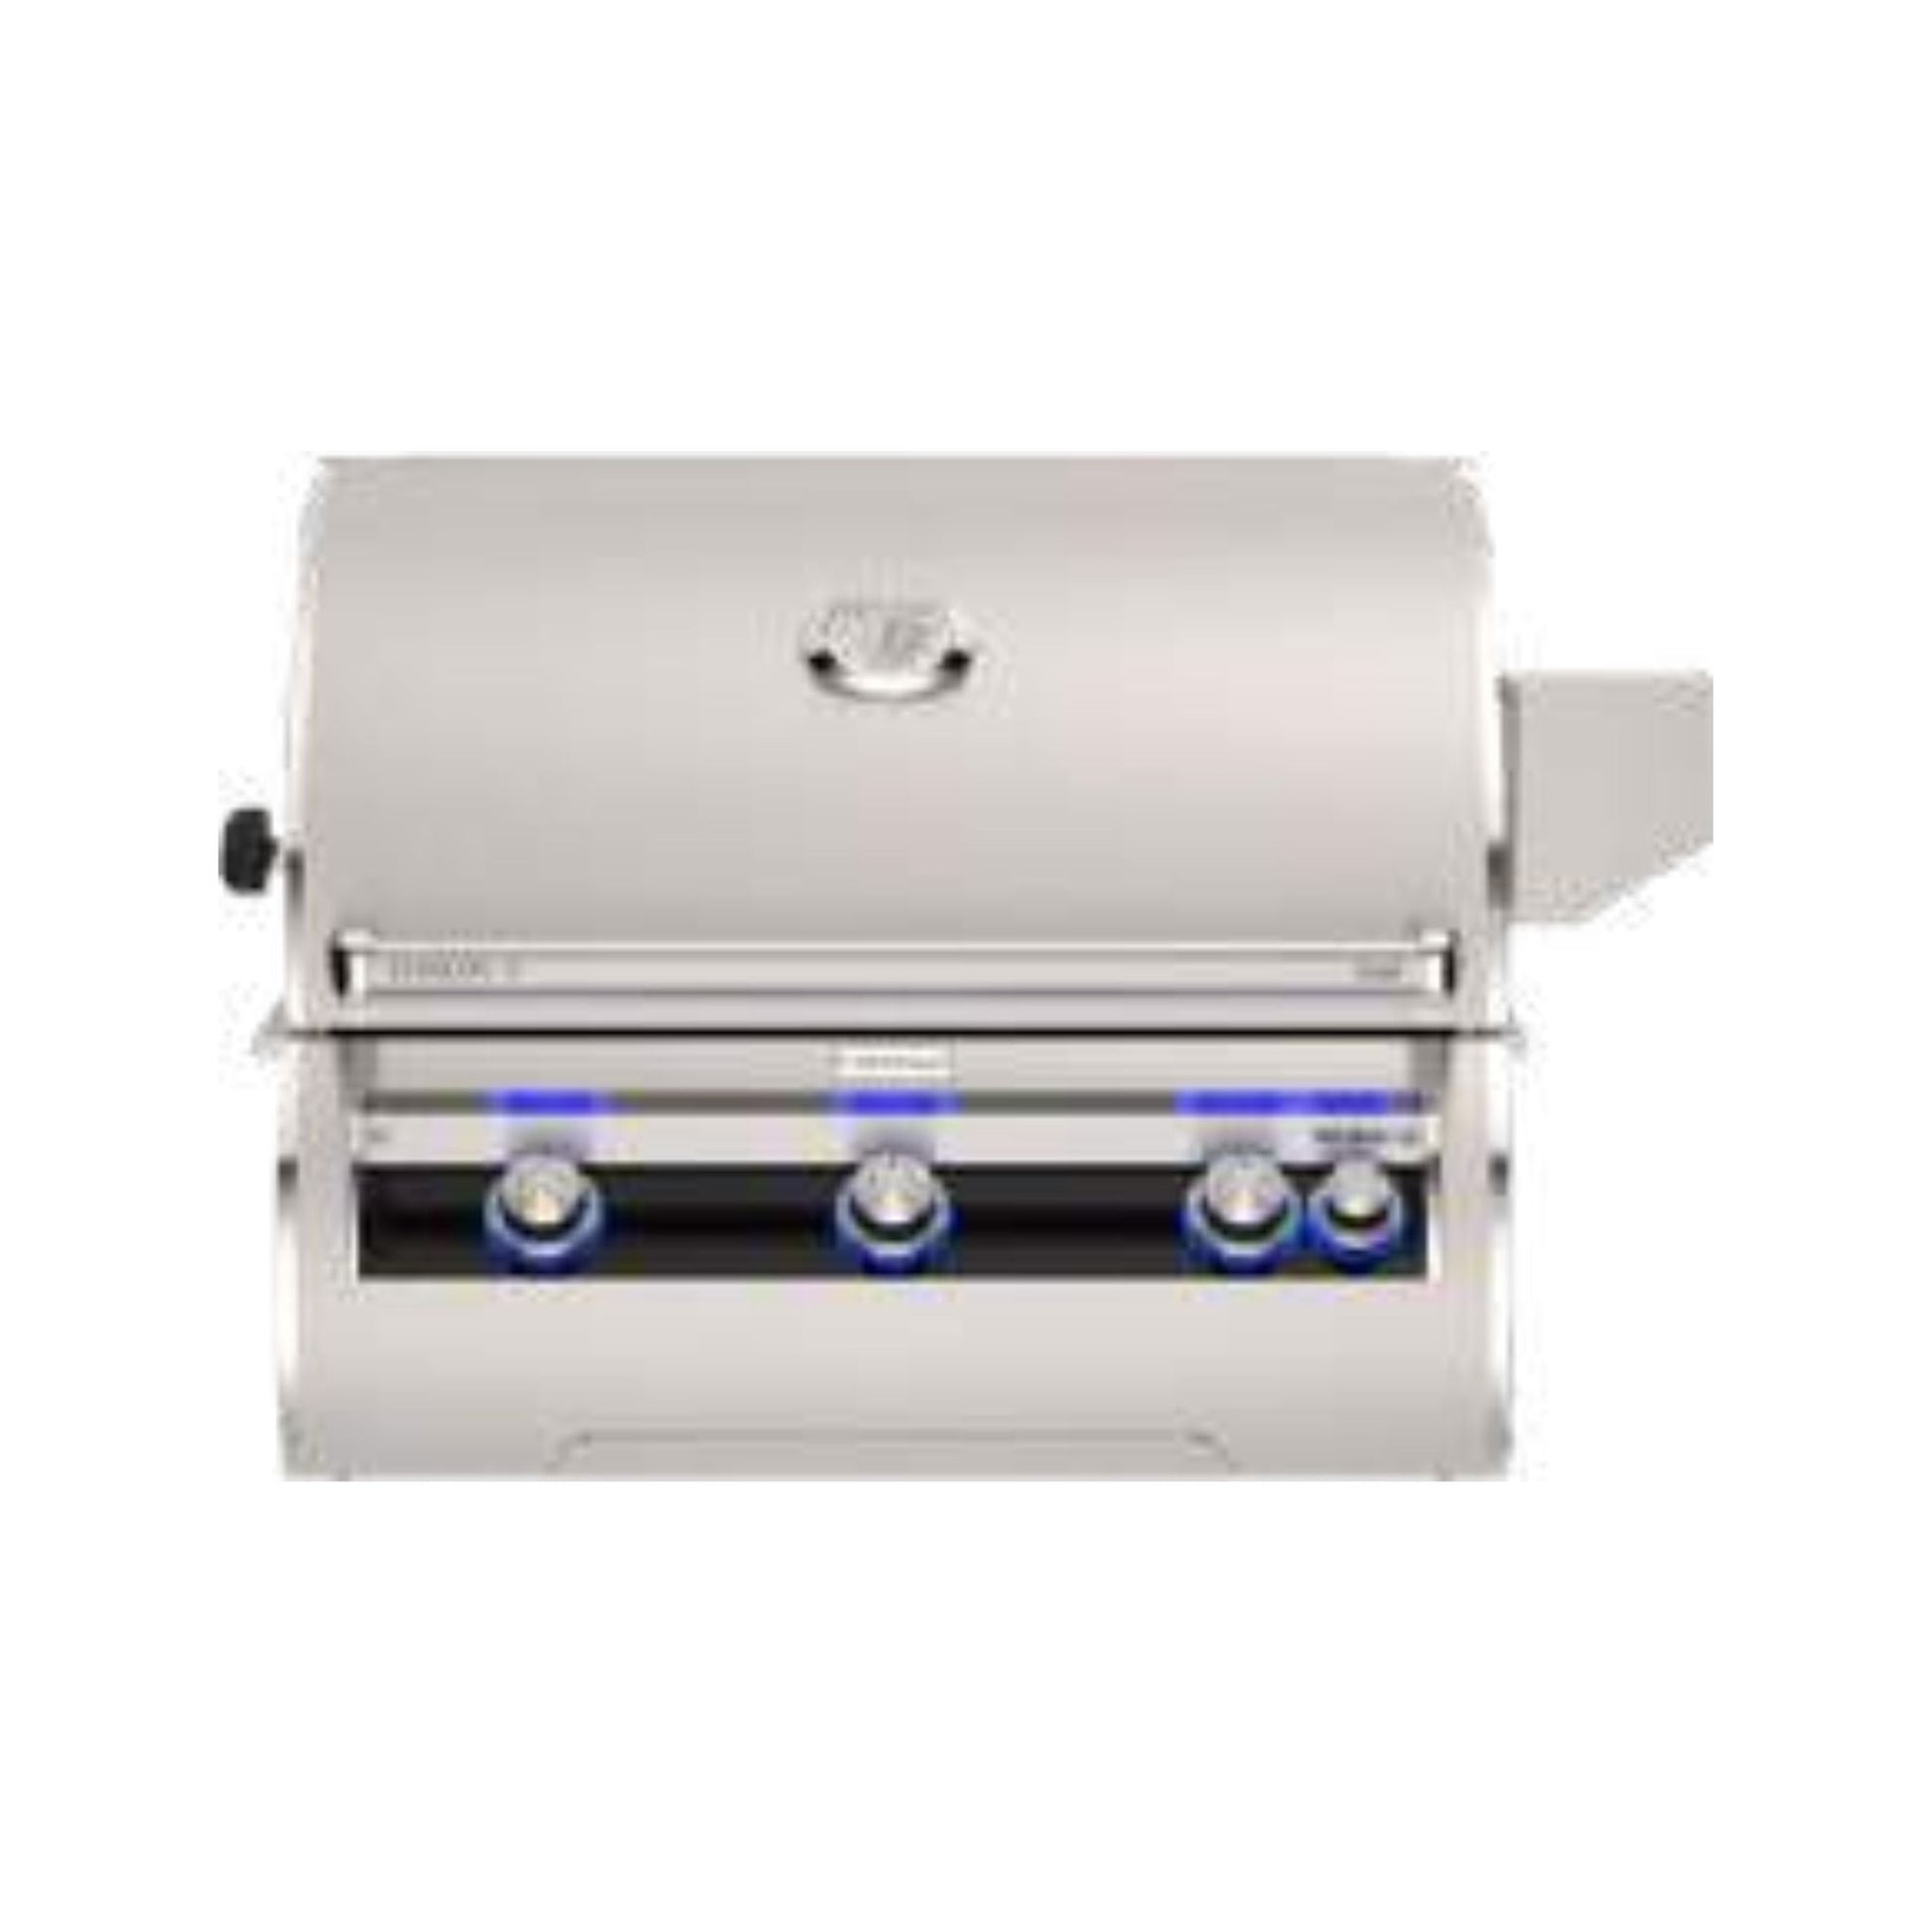 Fire Magic Echelon Diamond E660i 30" 3-Burner Built-In Gas Grill With Analog Thermometer and Optional Magic View Window